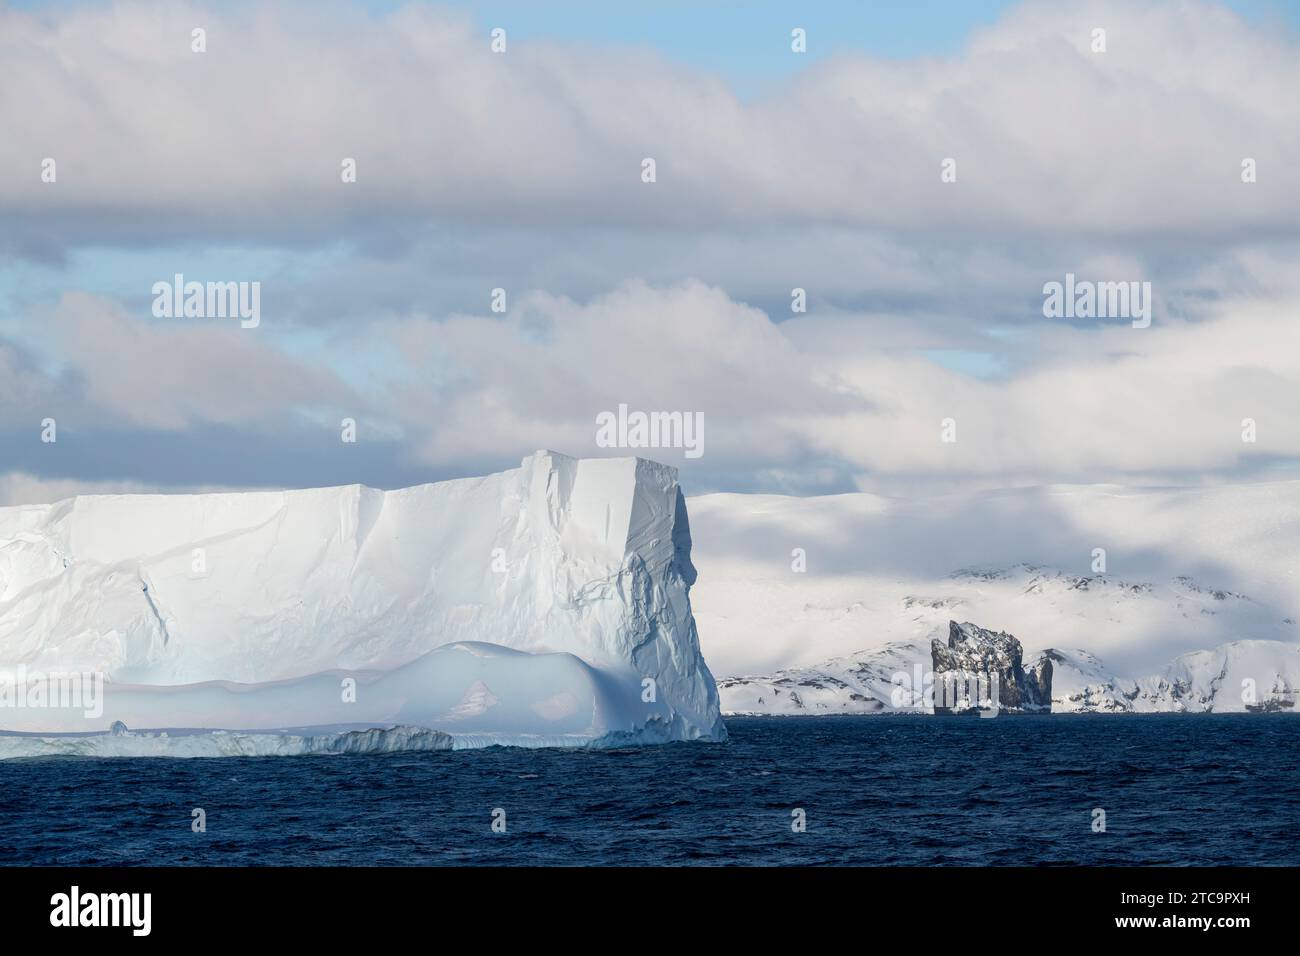 Antarcica, South Shetland Islands, Bransfield Strait. Large iceberg and New Rock with coastal view of Deception Island in the distance. Stock Photo